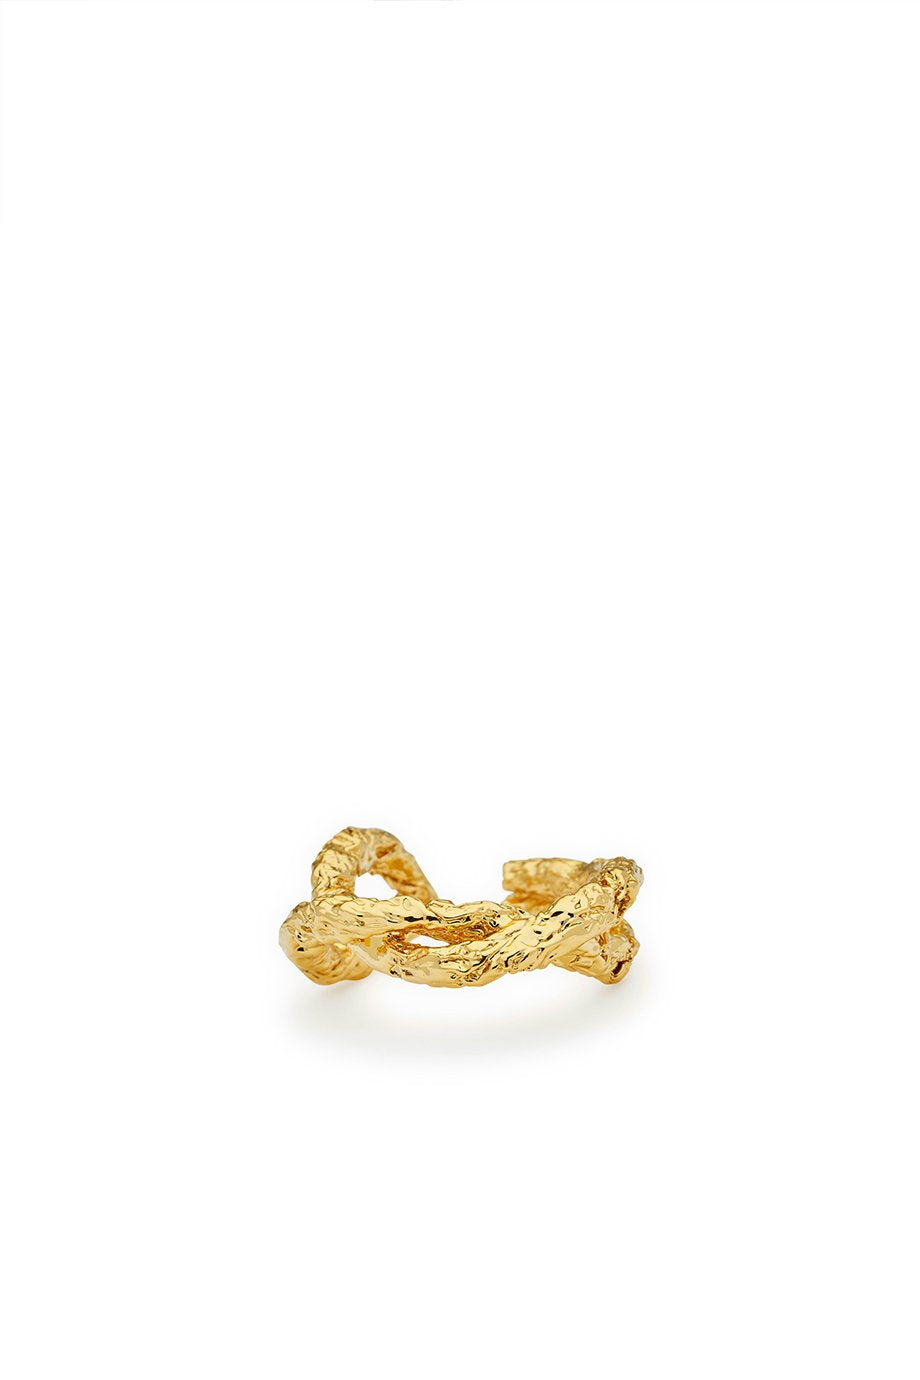 Amber Sceats Velora Ring - Gold